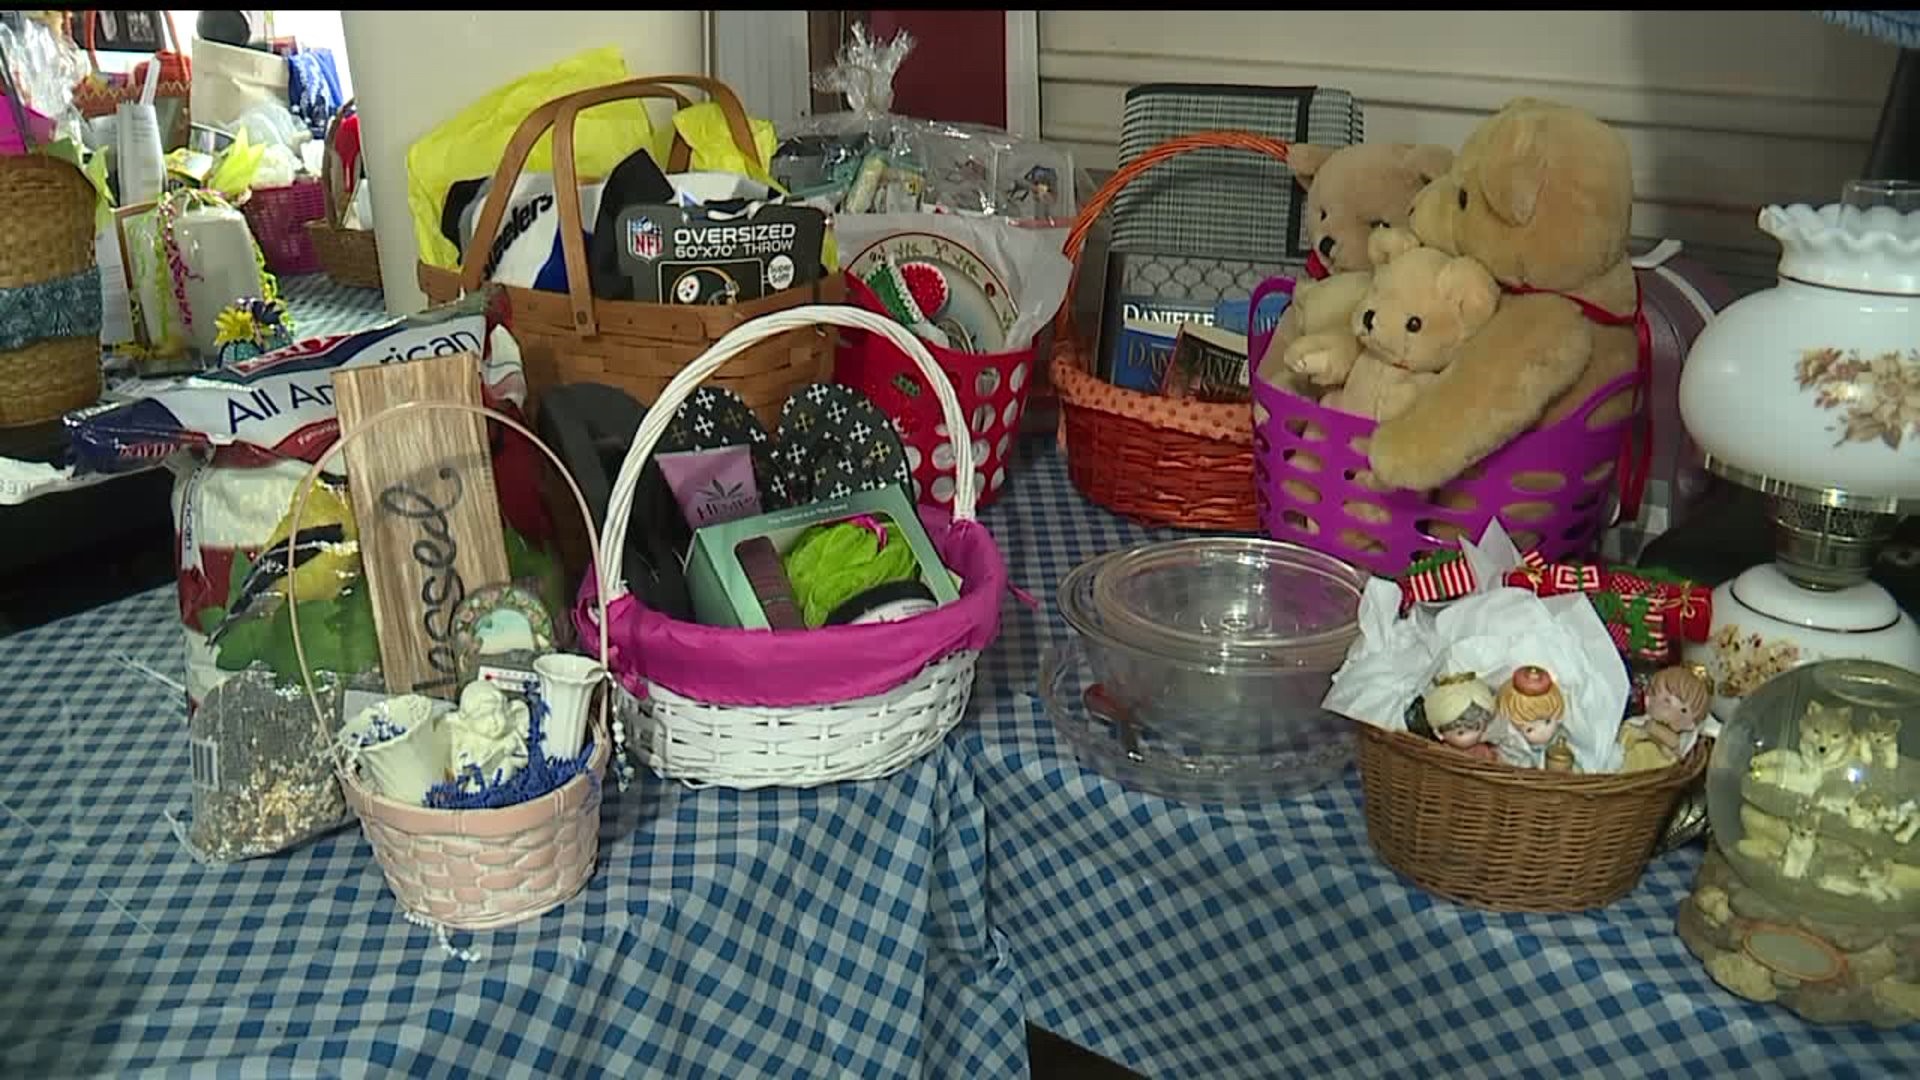 Yard sale auction in York County helps raise money for children in need